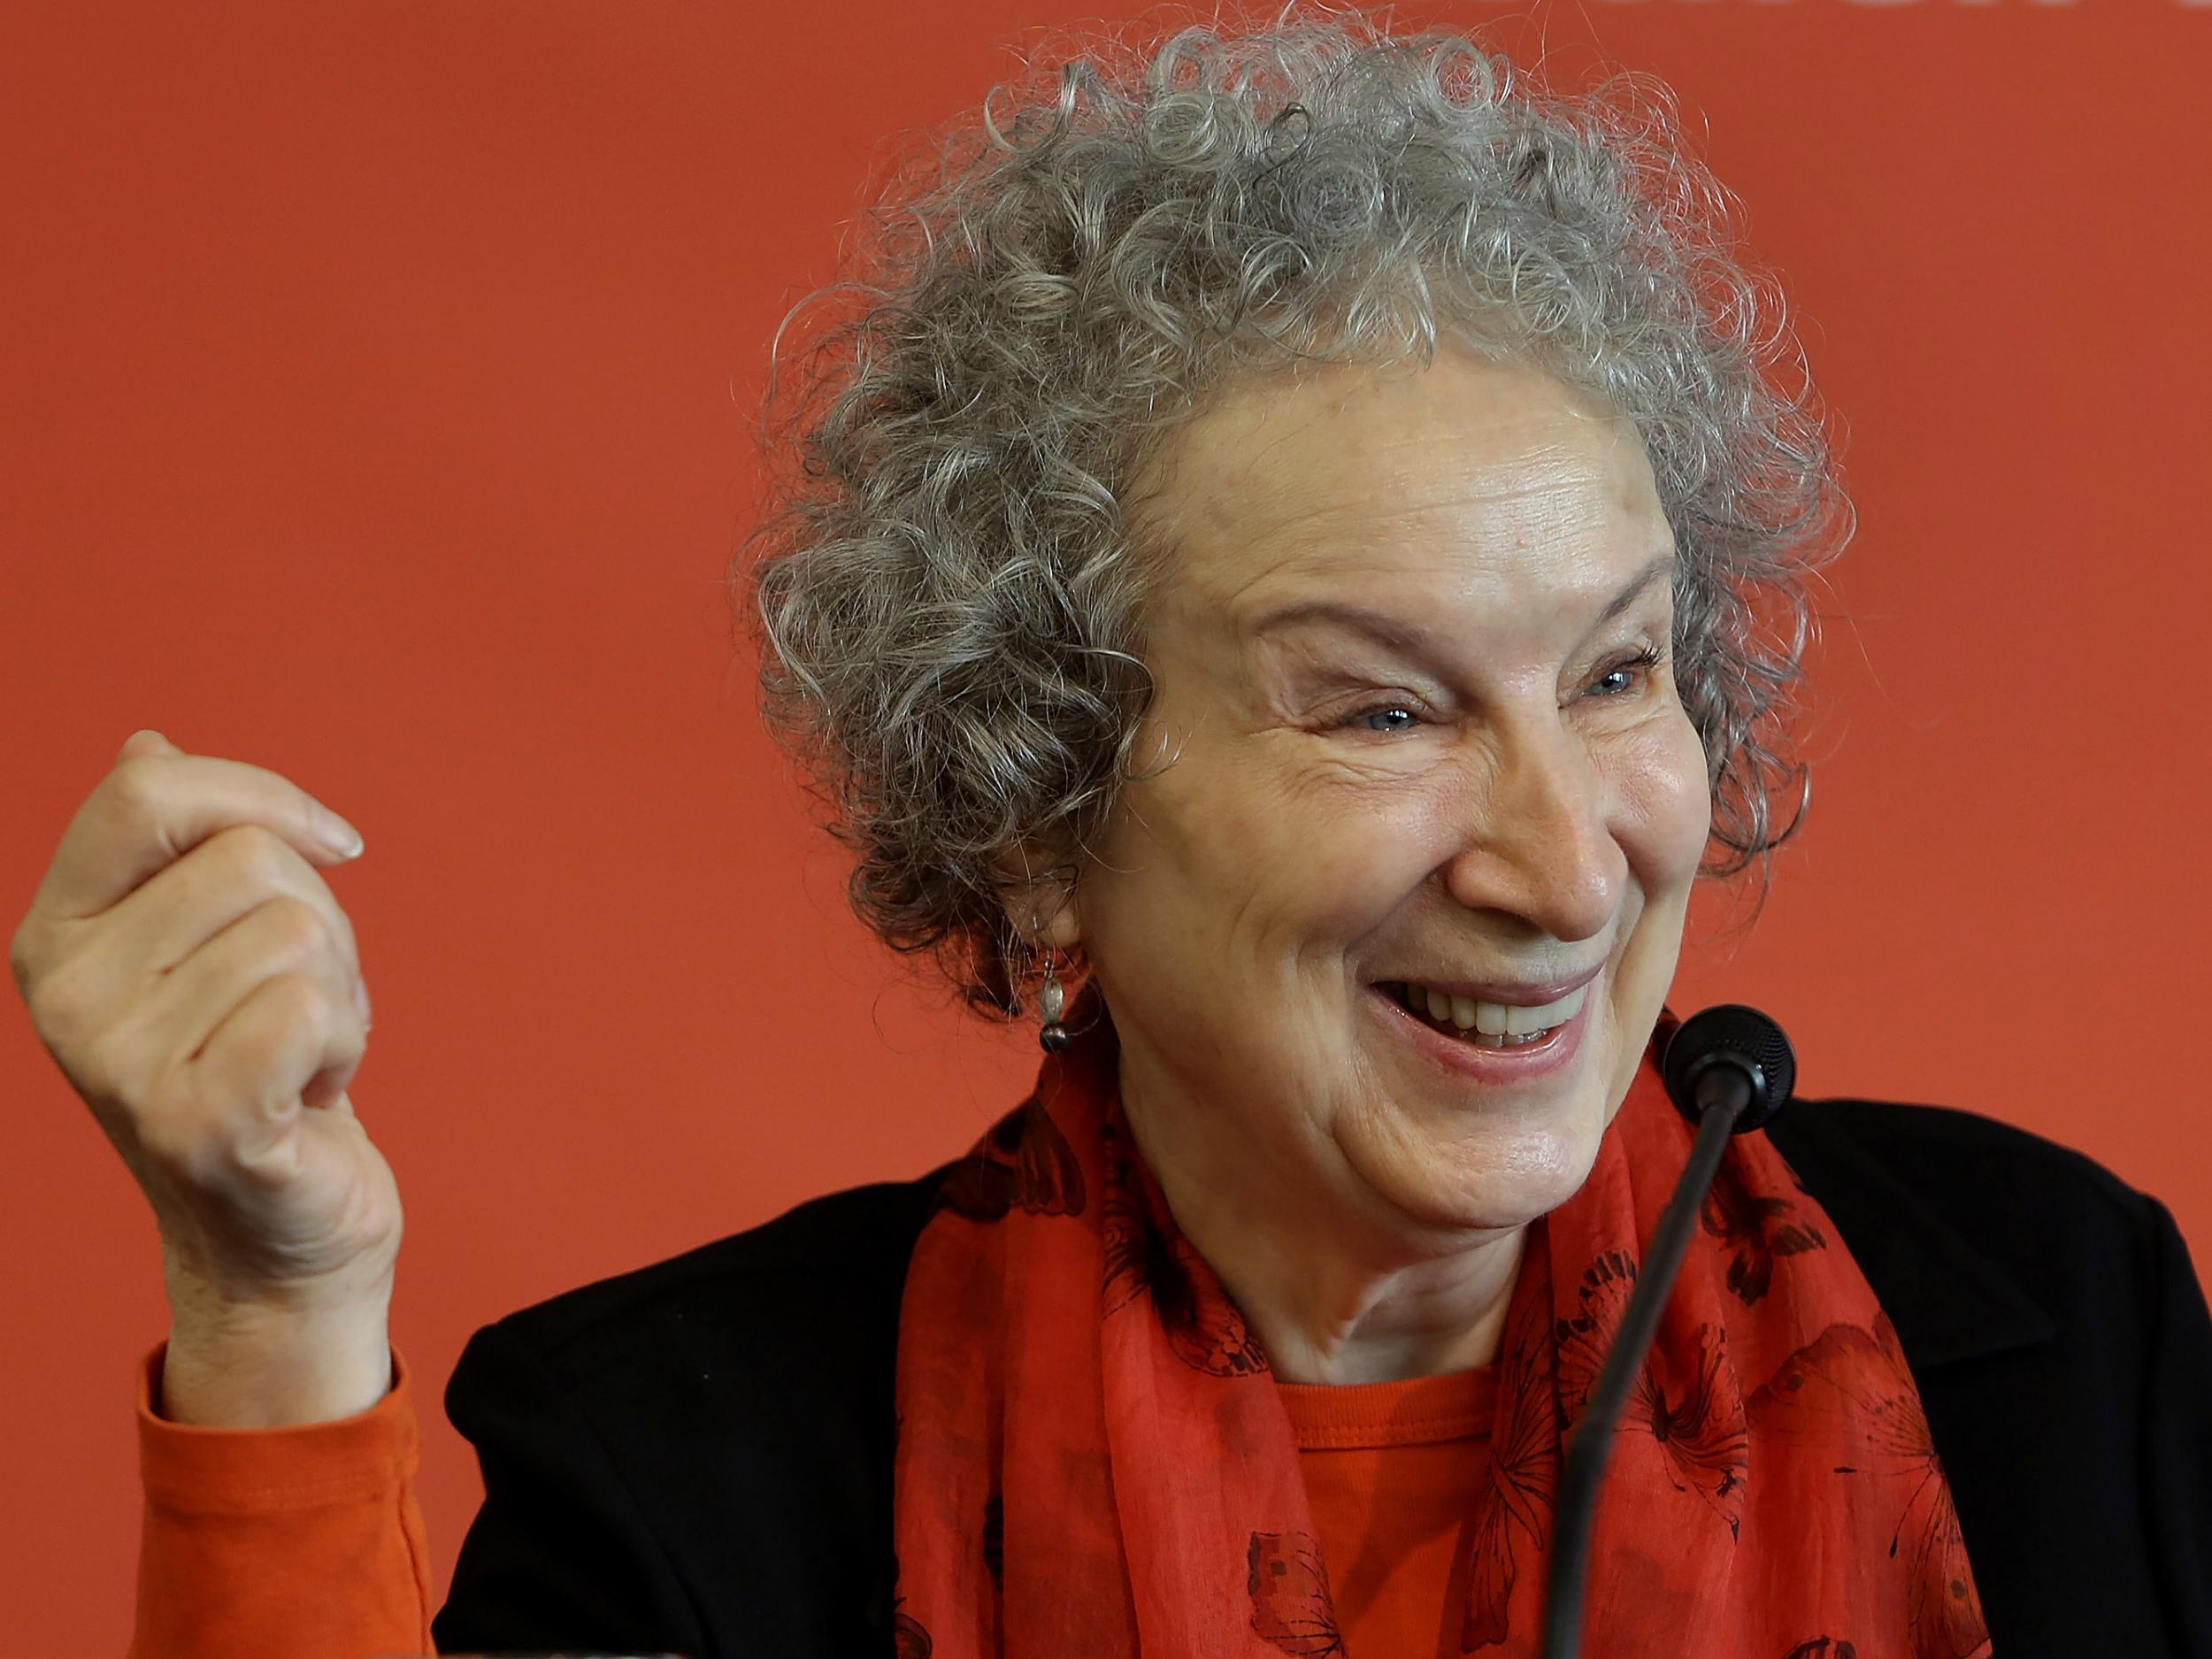 Margaret Atwood’s ‘The Blind Assassin’ is one of the top reads on the site